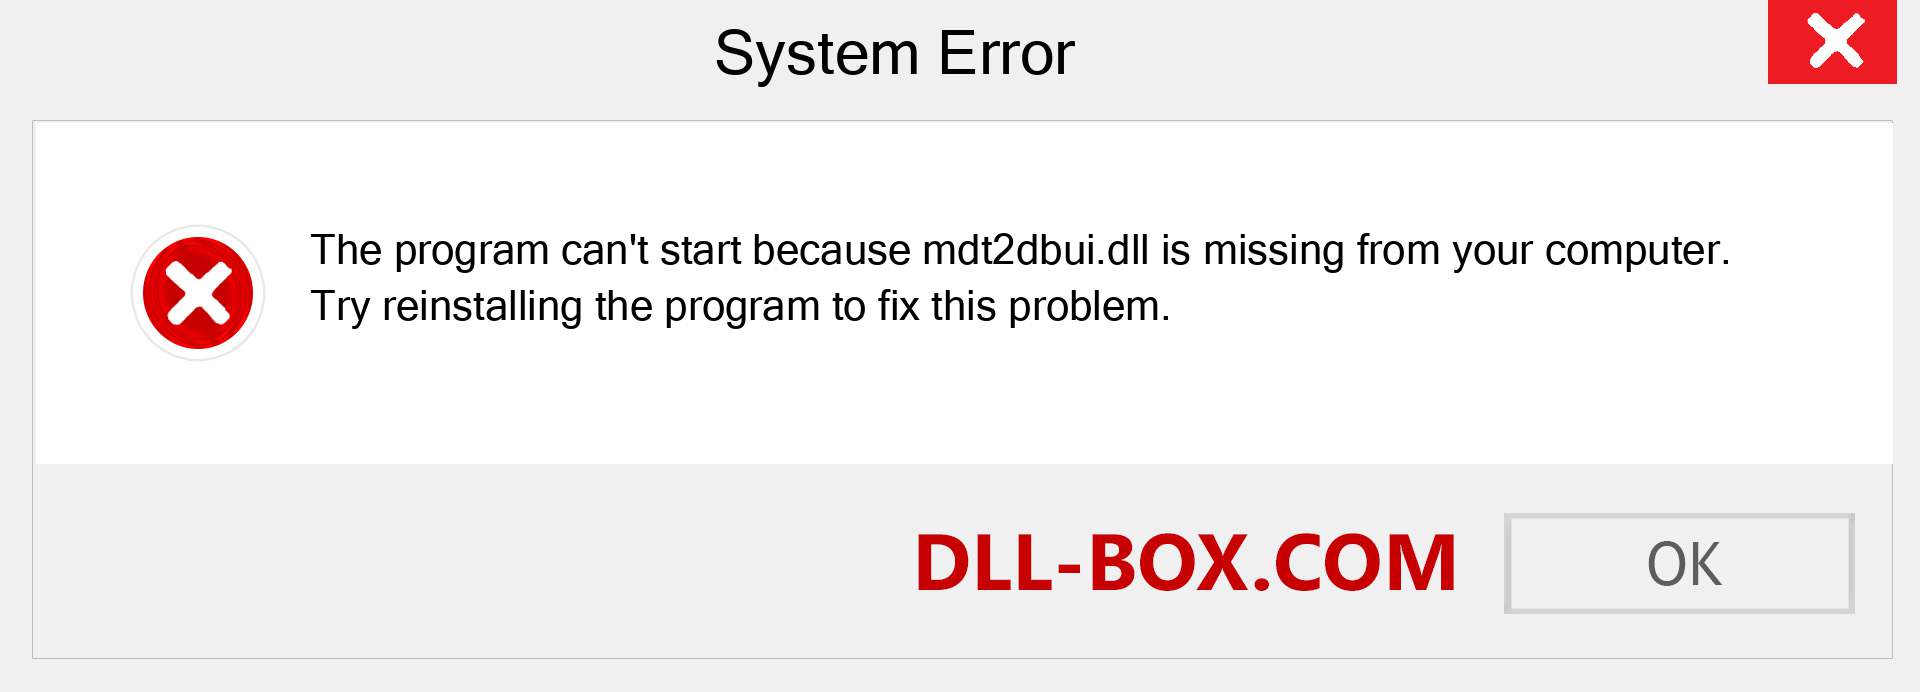  mdt2dbui.dll file is missing?. Download for Windows 7, 8, 10 - Fix  mdt2dbui dll Missing Error on Windows, photos, images